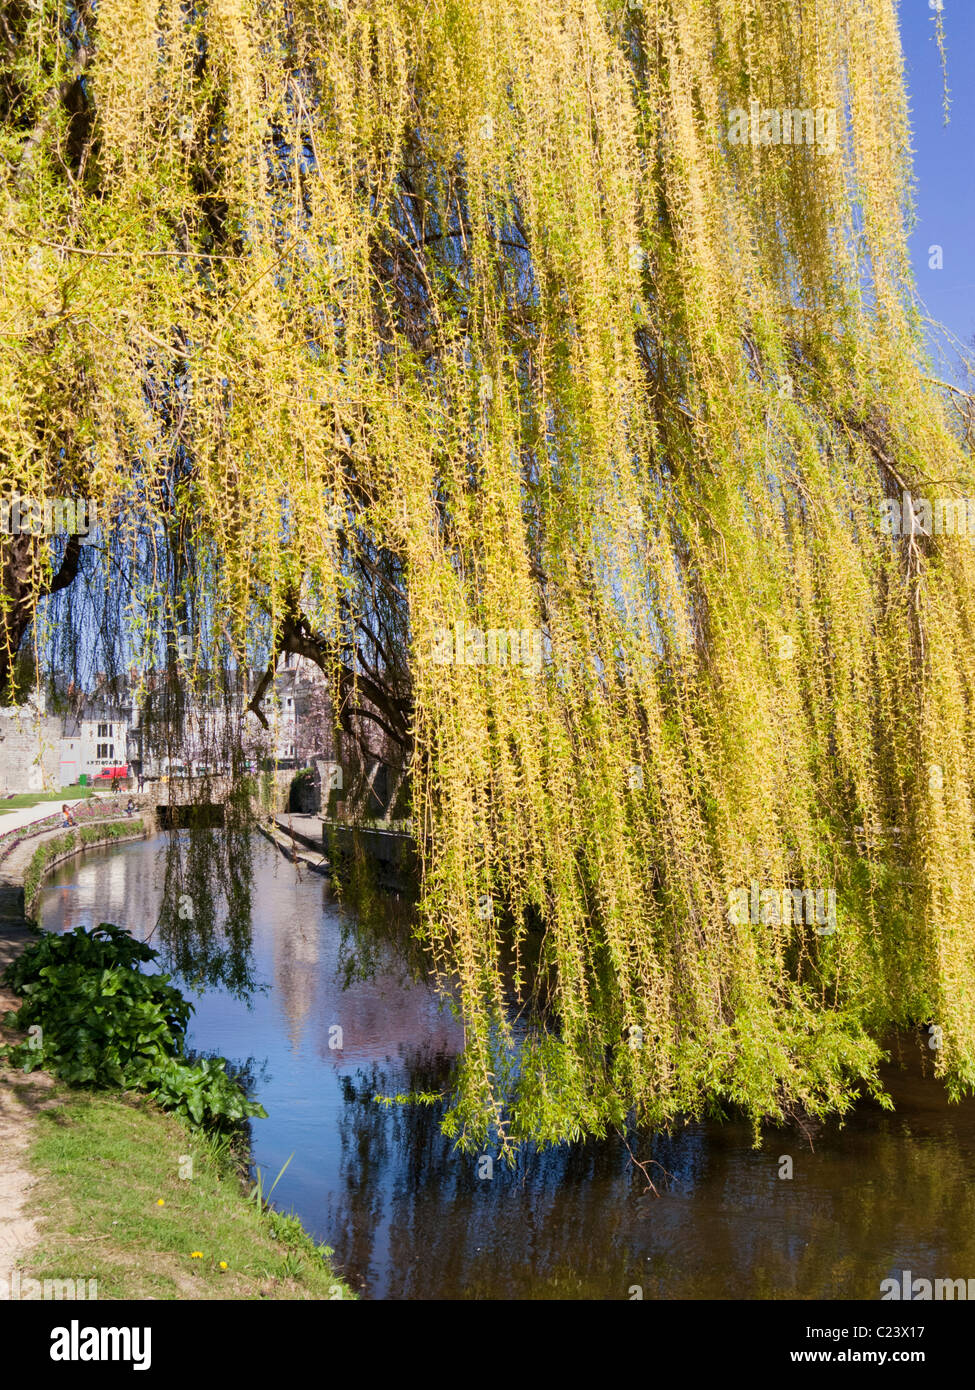 Weeping willow tree leaves hanging over a river France, Europe Stock Photo